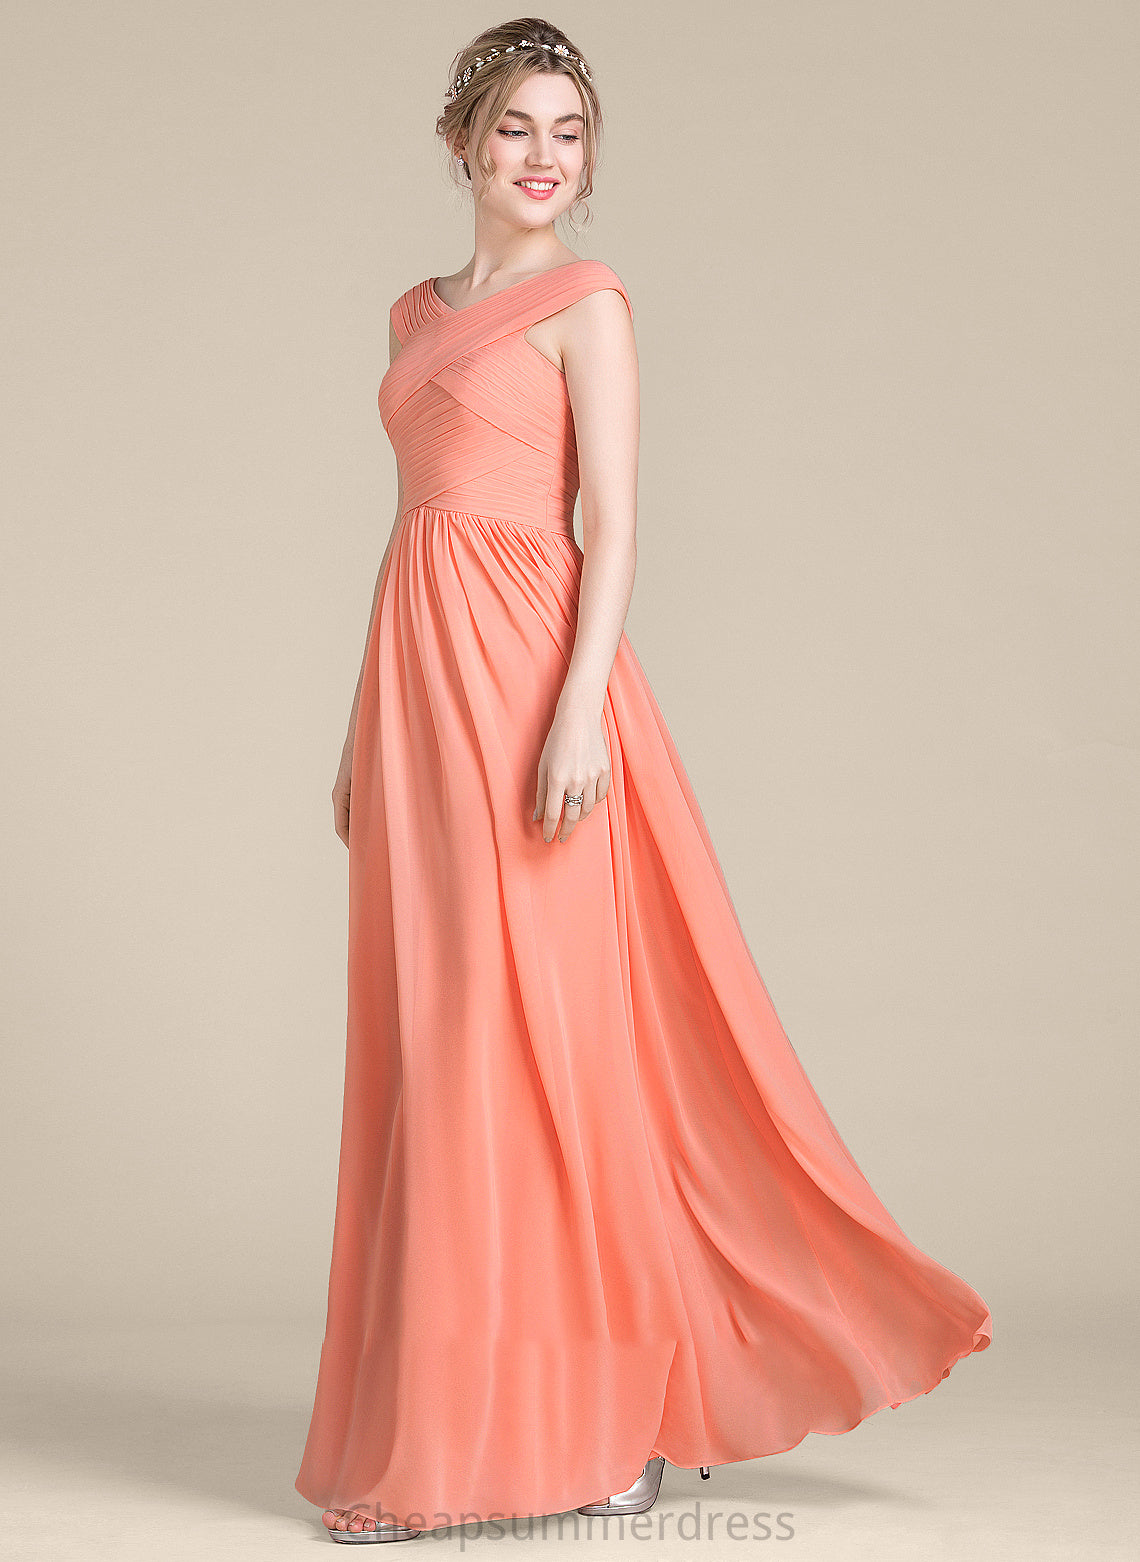 Jayla Prom Dresses Floor-Length Ruffle V-neck Ball-Gown/Princess With Chiffon